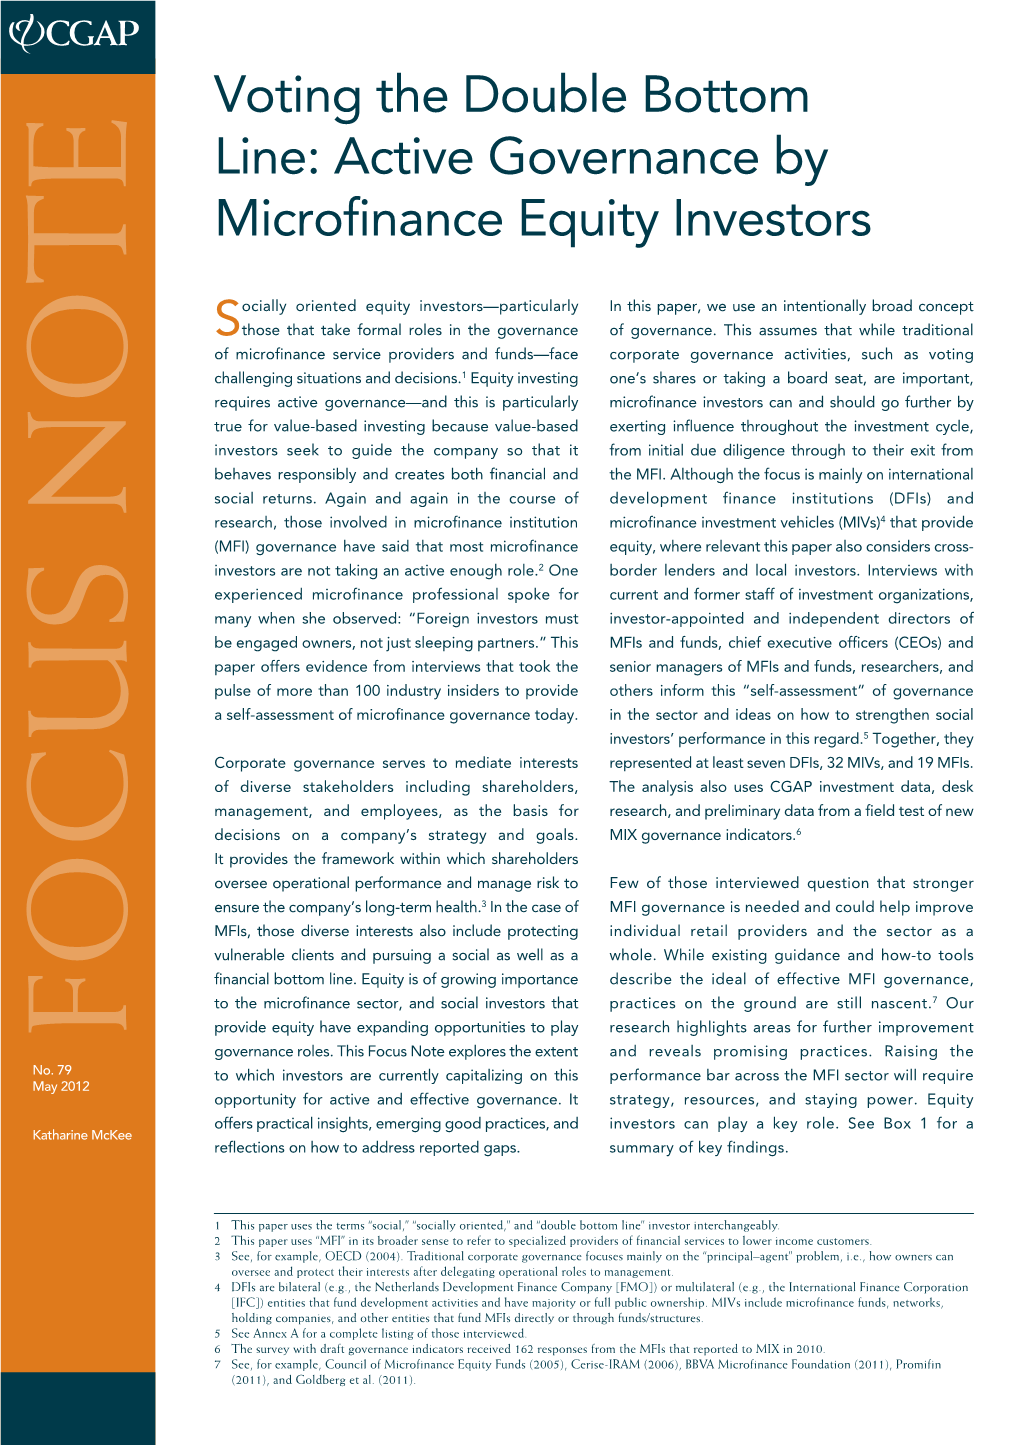 Voting the Double Bottom Line: Active Governance by Microfinance Equity Investors